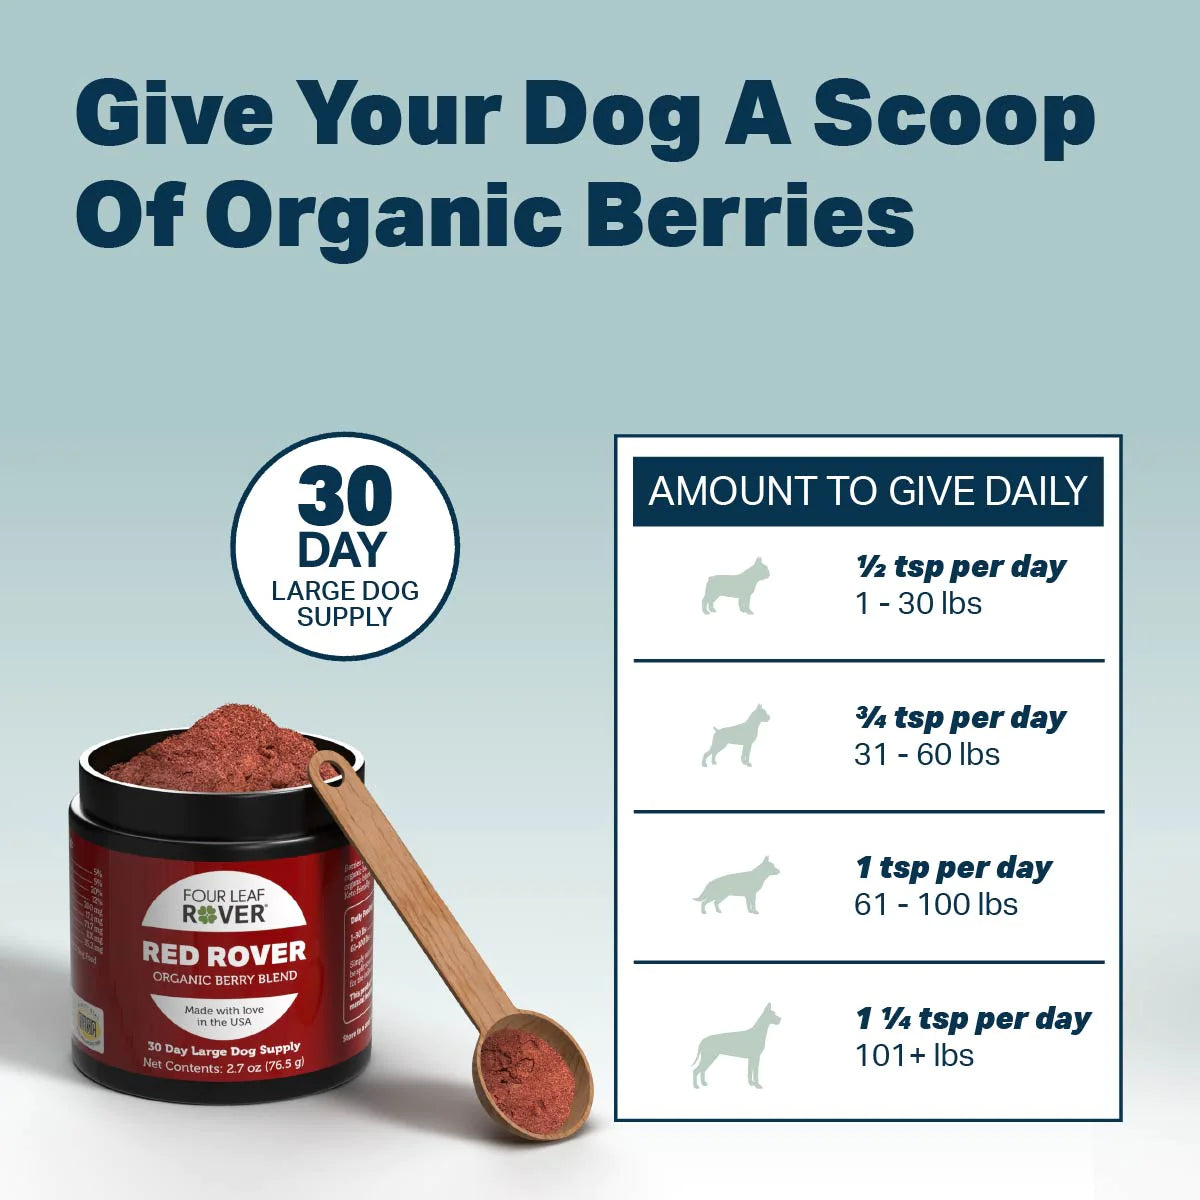 Four Leaf Rover Red Rover | Organic Berries for Dogs